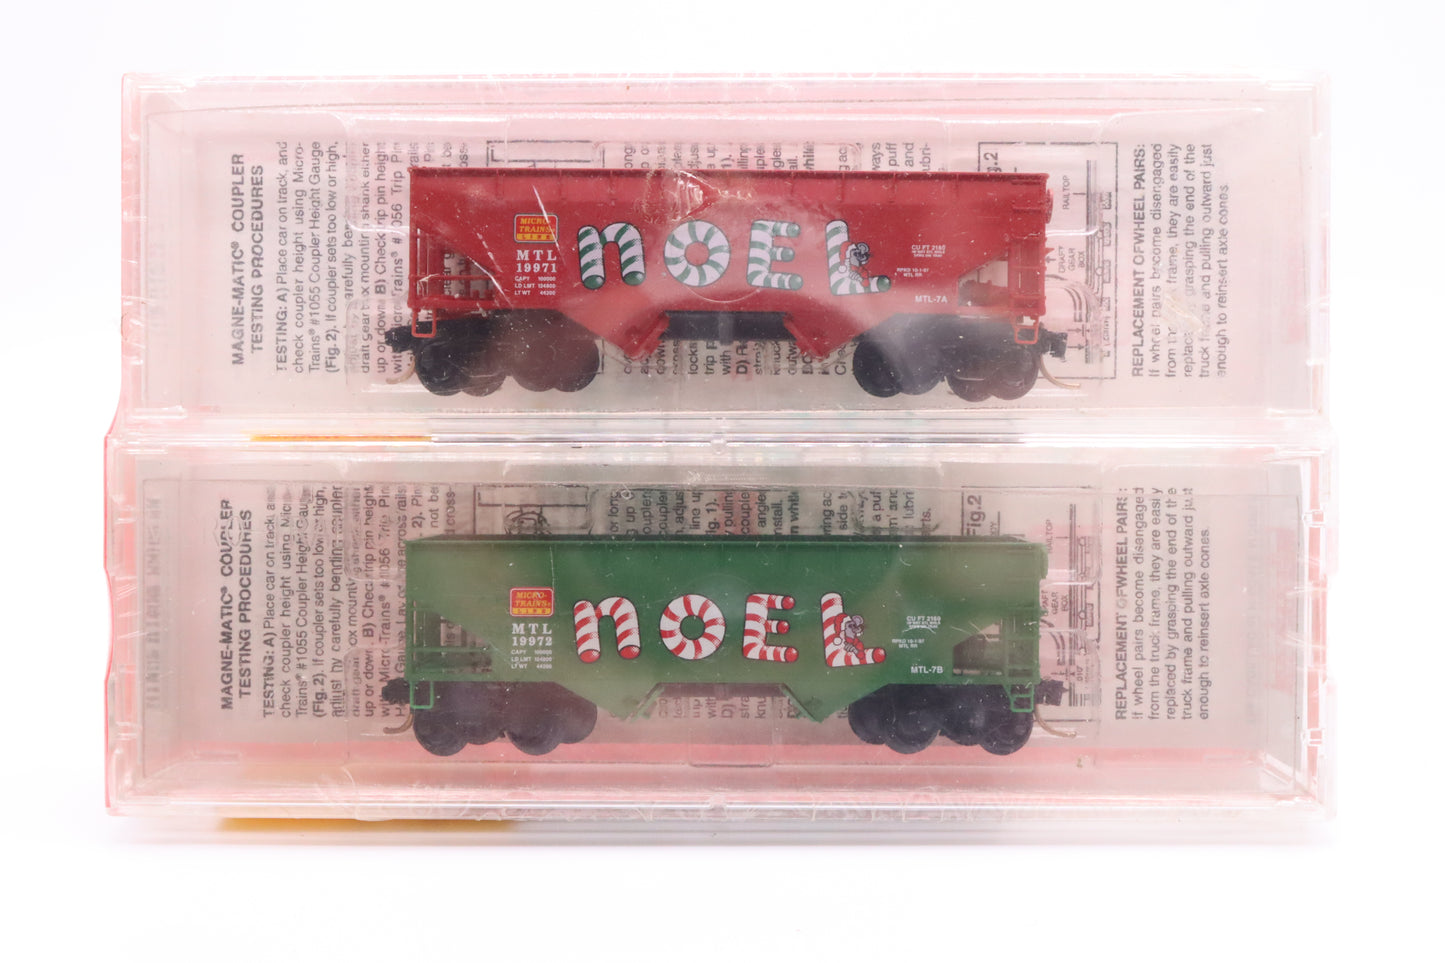 MTL-55392 - 33' Twin Bay Hopper Offset Sides (2 Pack) - 1997 Micro-Trains Holiday Car - MTL-19971 / MTL-19972